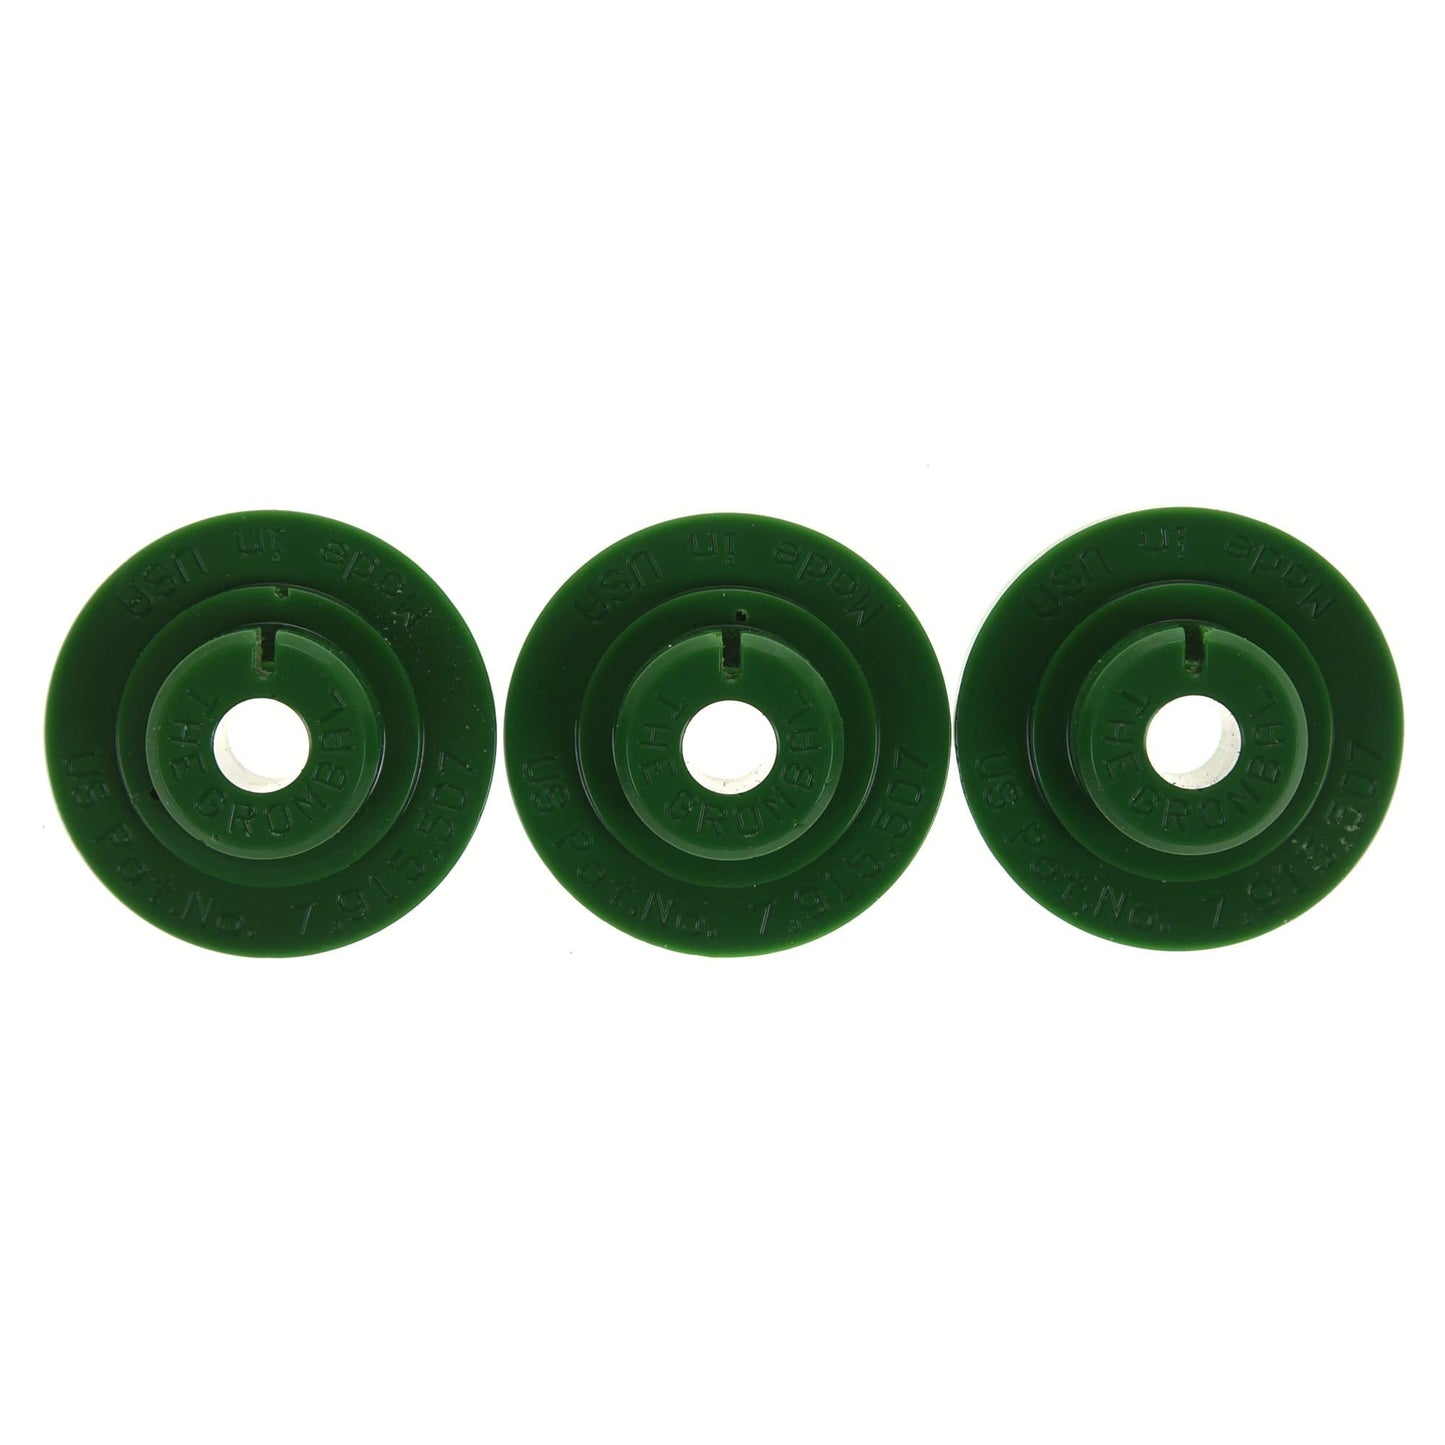 Grombal Cymbal Grommet Green (3-Pack) Drums and Percussion / Parts and Accessories / Drum Parts